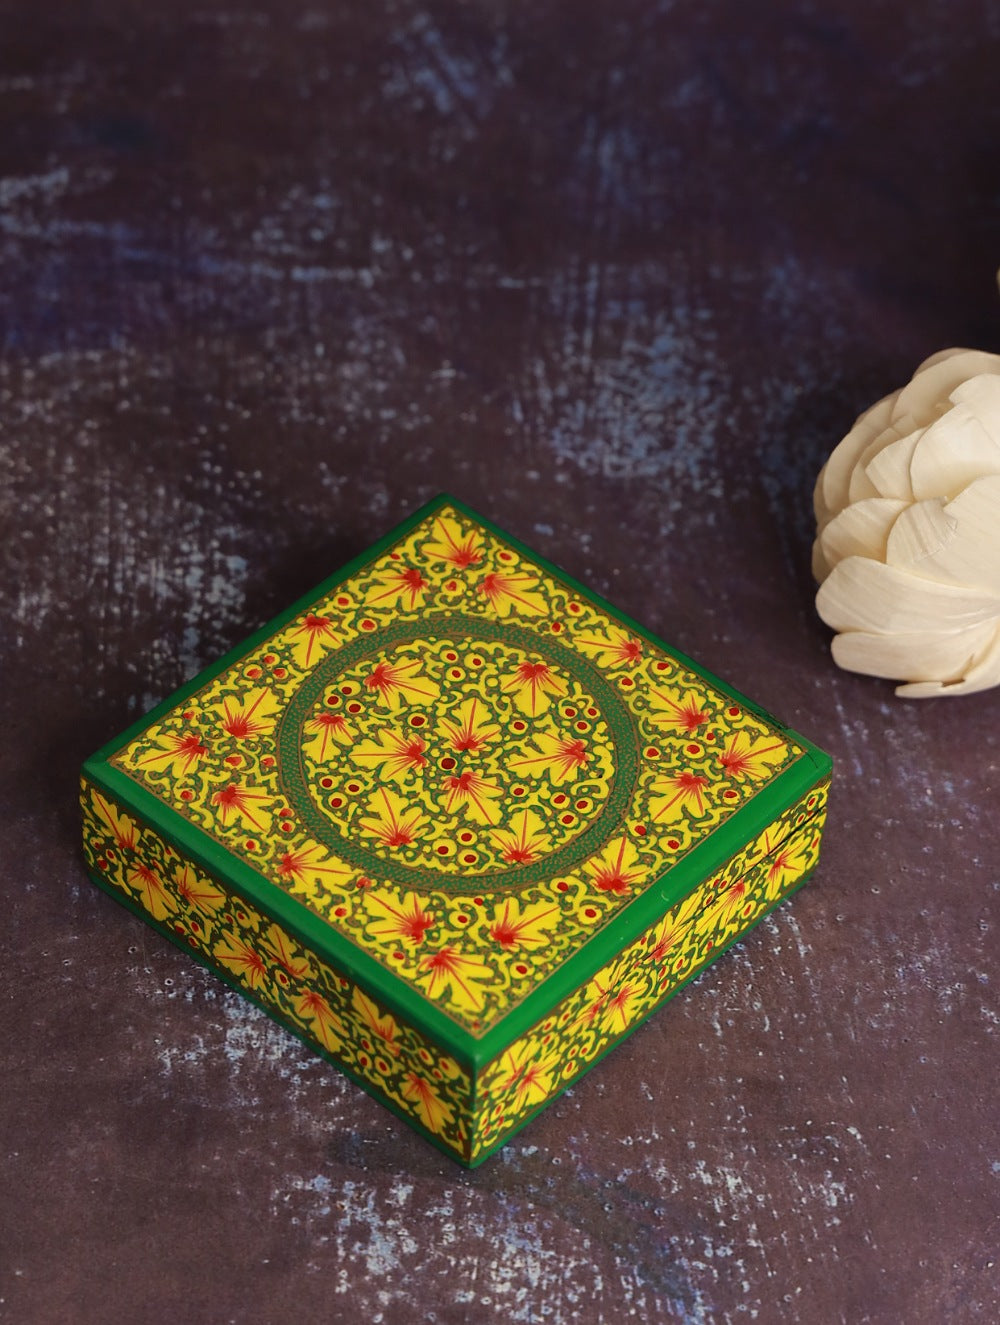 Load image into Gallery viewer, Kashmiri Art Coaster Set - Green Floral